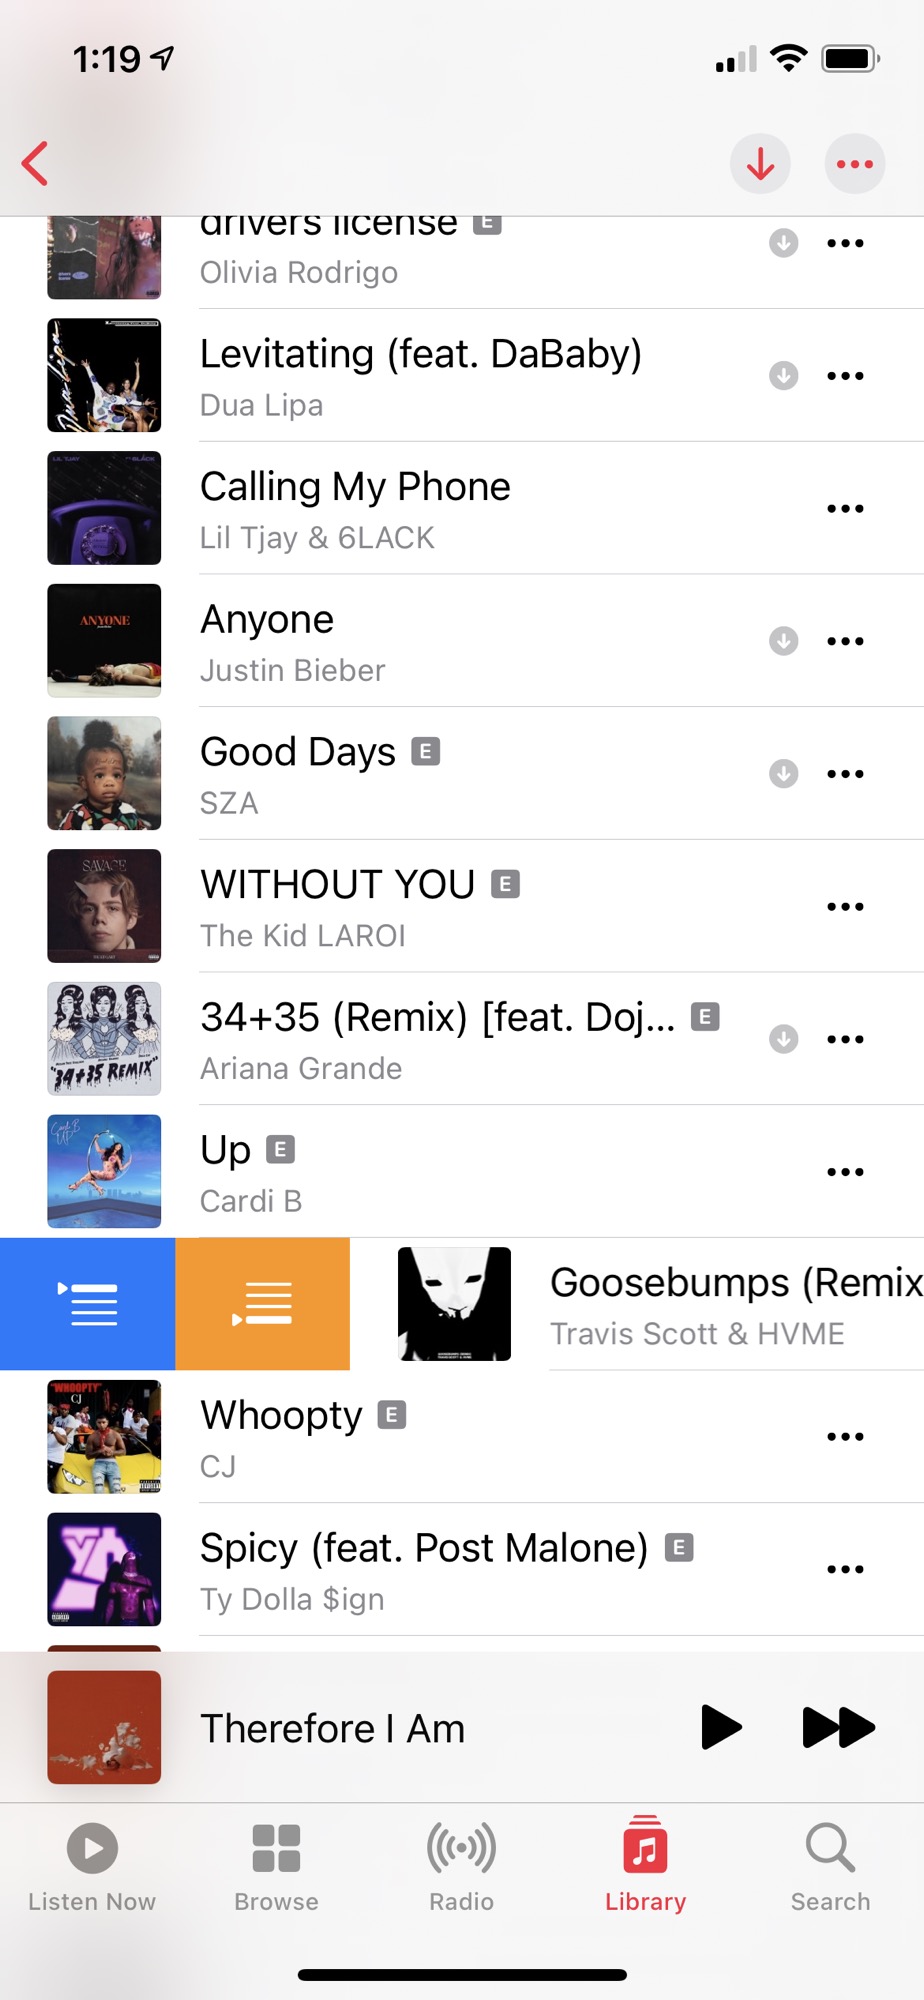 An iPhone screenshot of the Music app in iOS 14.5 showing the new swiping action to add songs to the Up Next queue